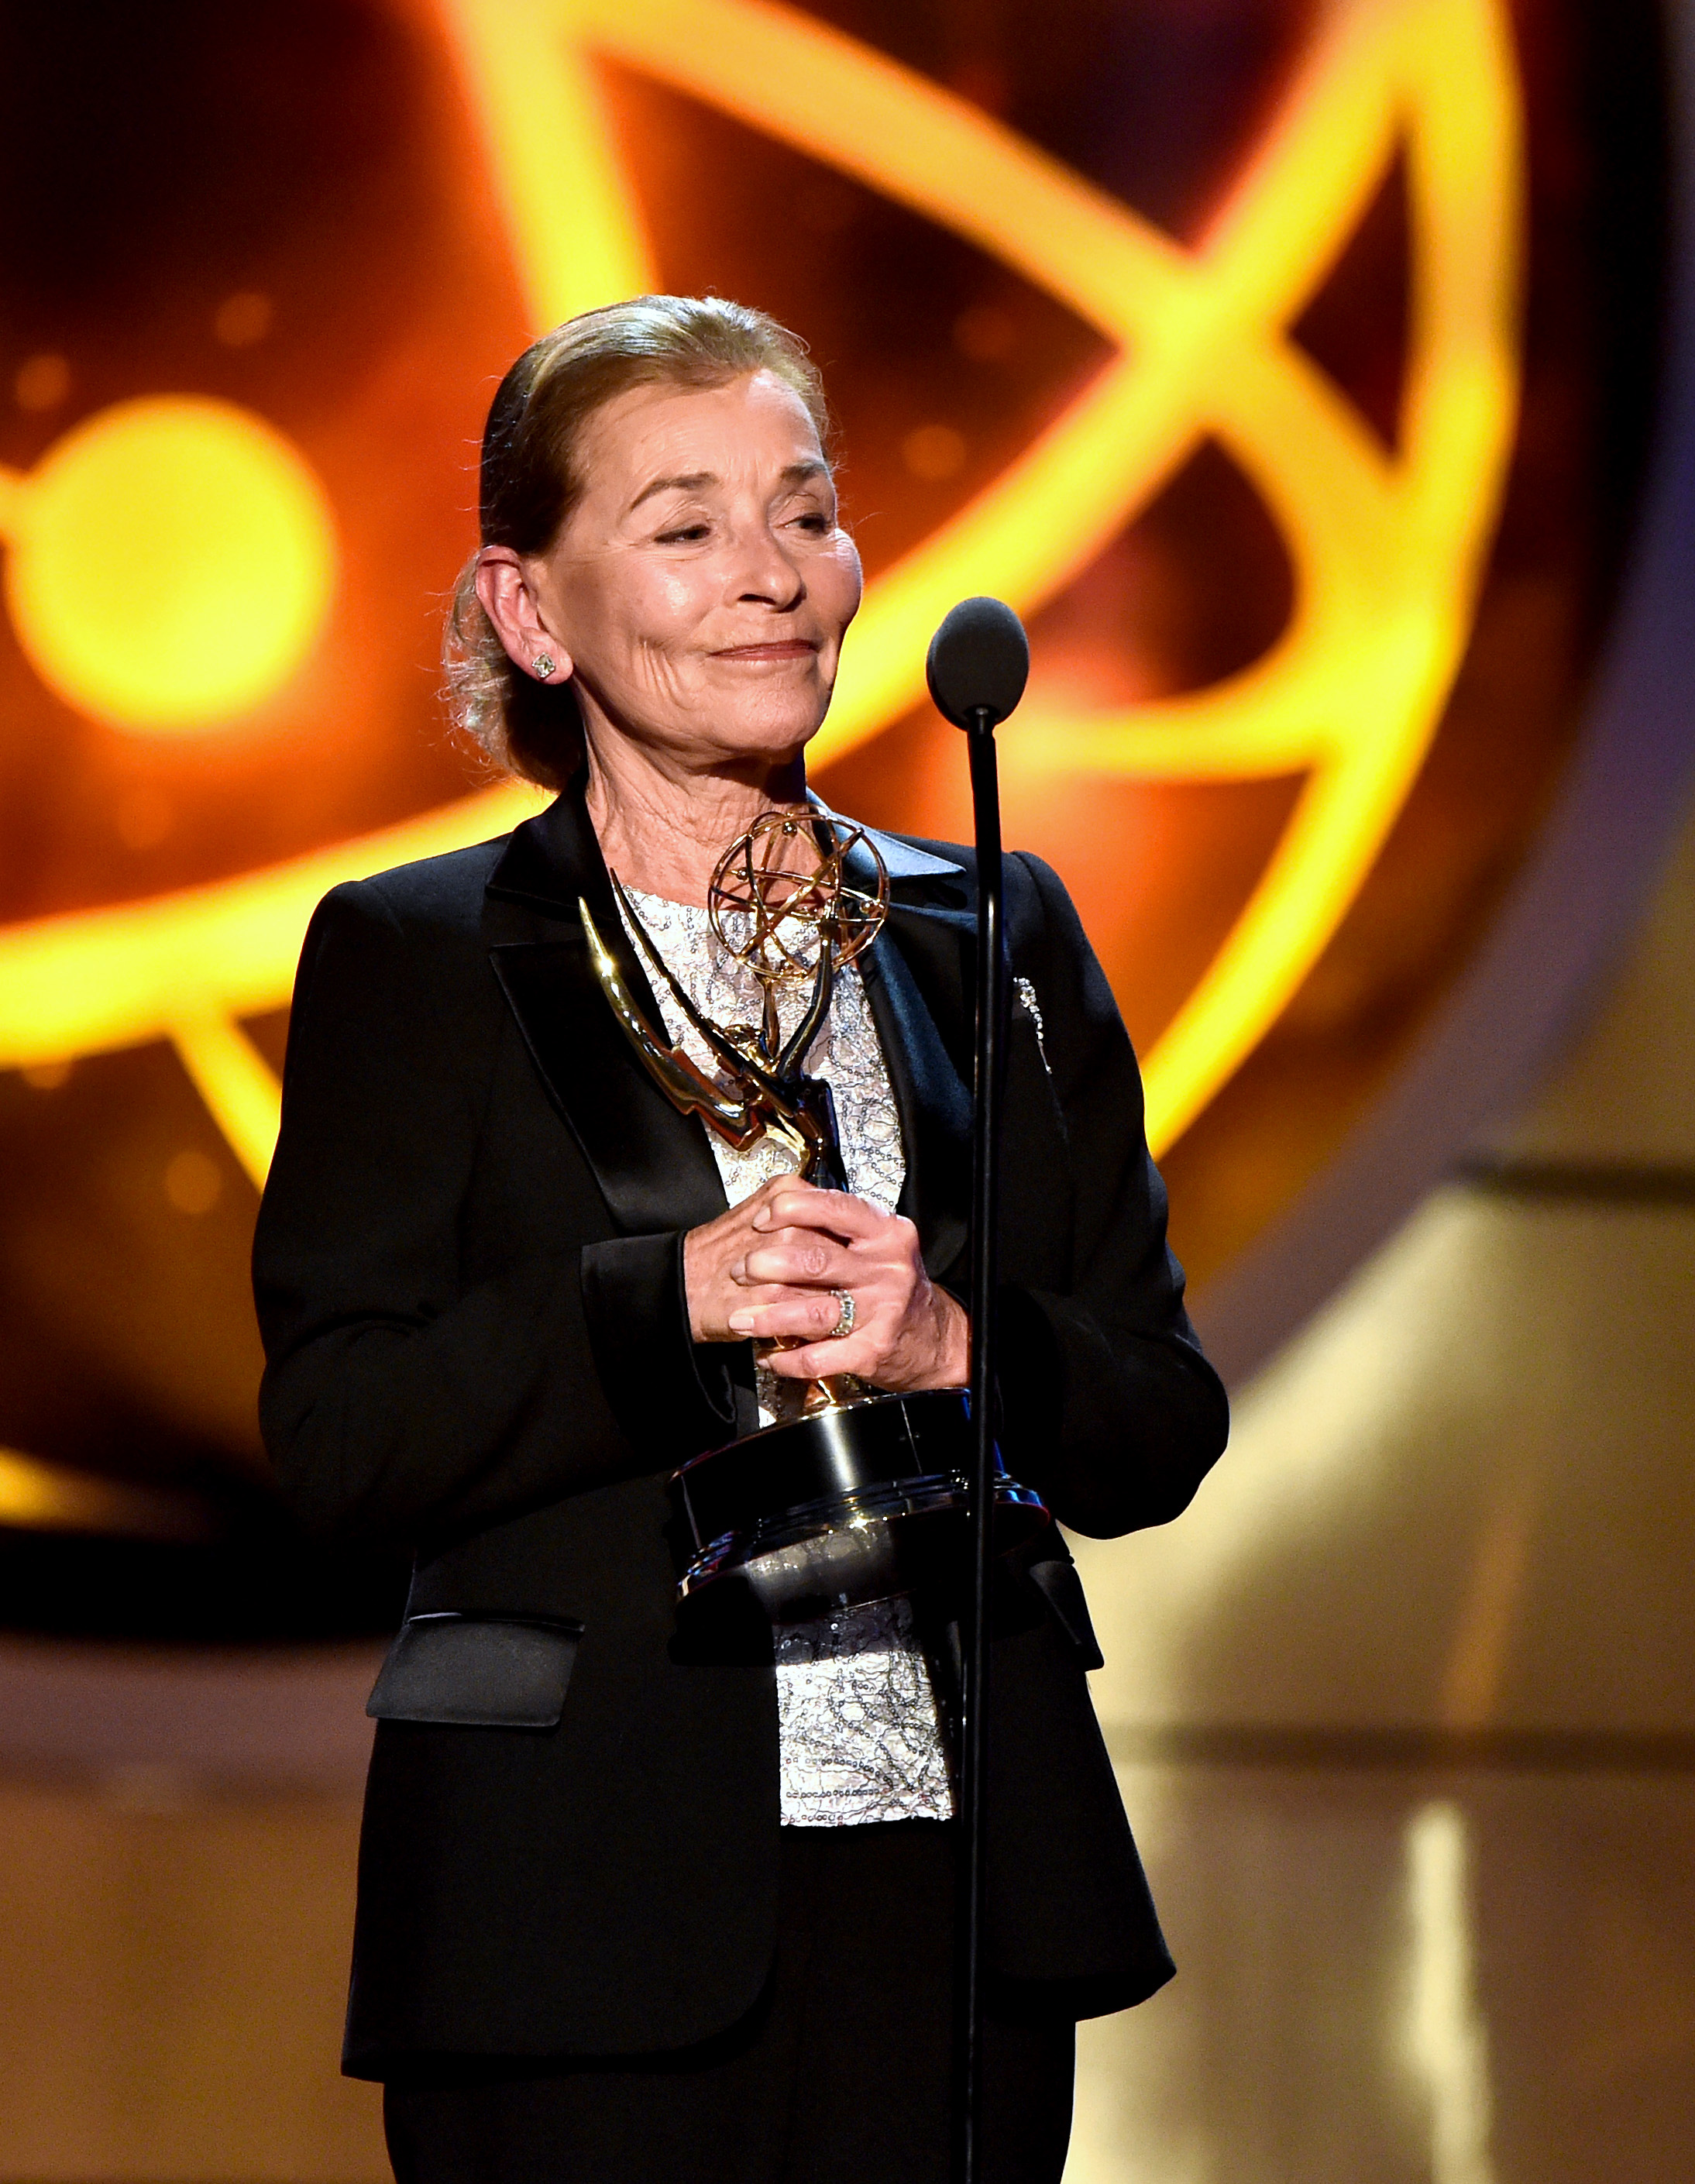 Judge Judy Sheindlin,posing with her Lifetime Achievement Award at the Emmy Awards in Los Angeles in 2019 | Source: Getty Images